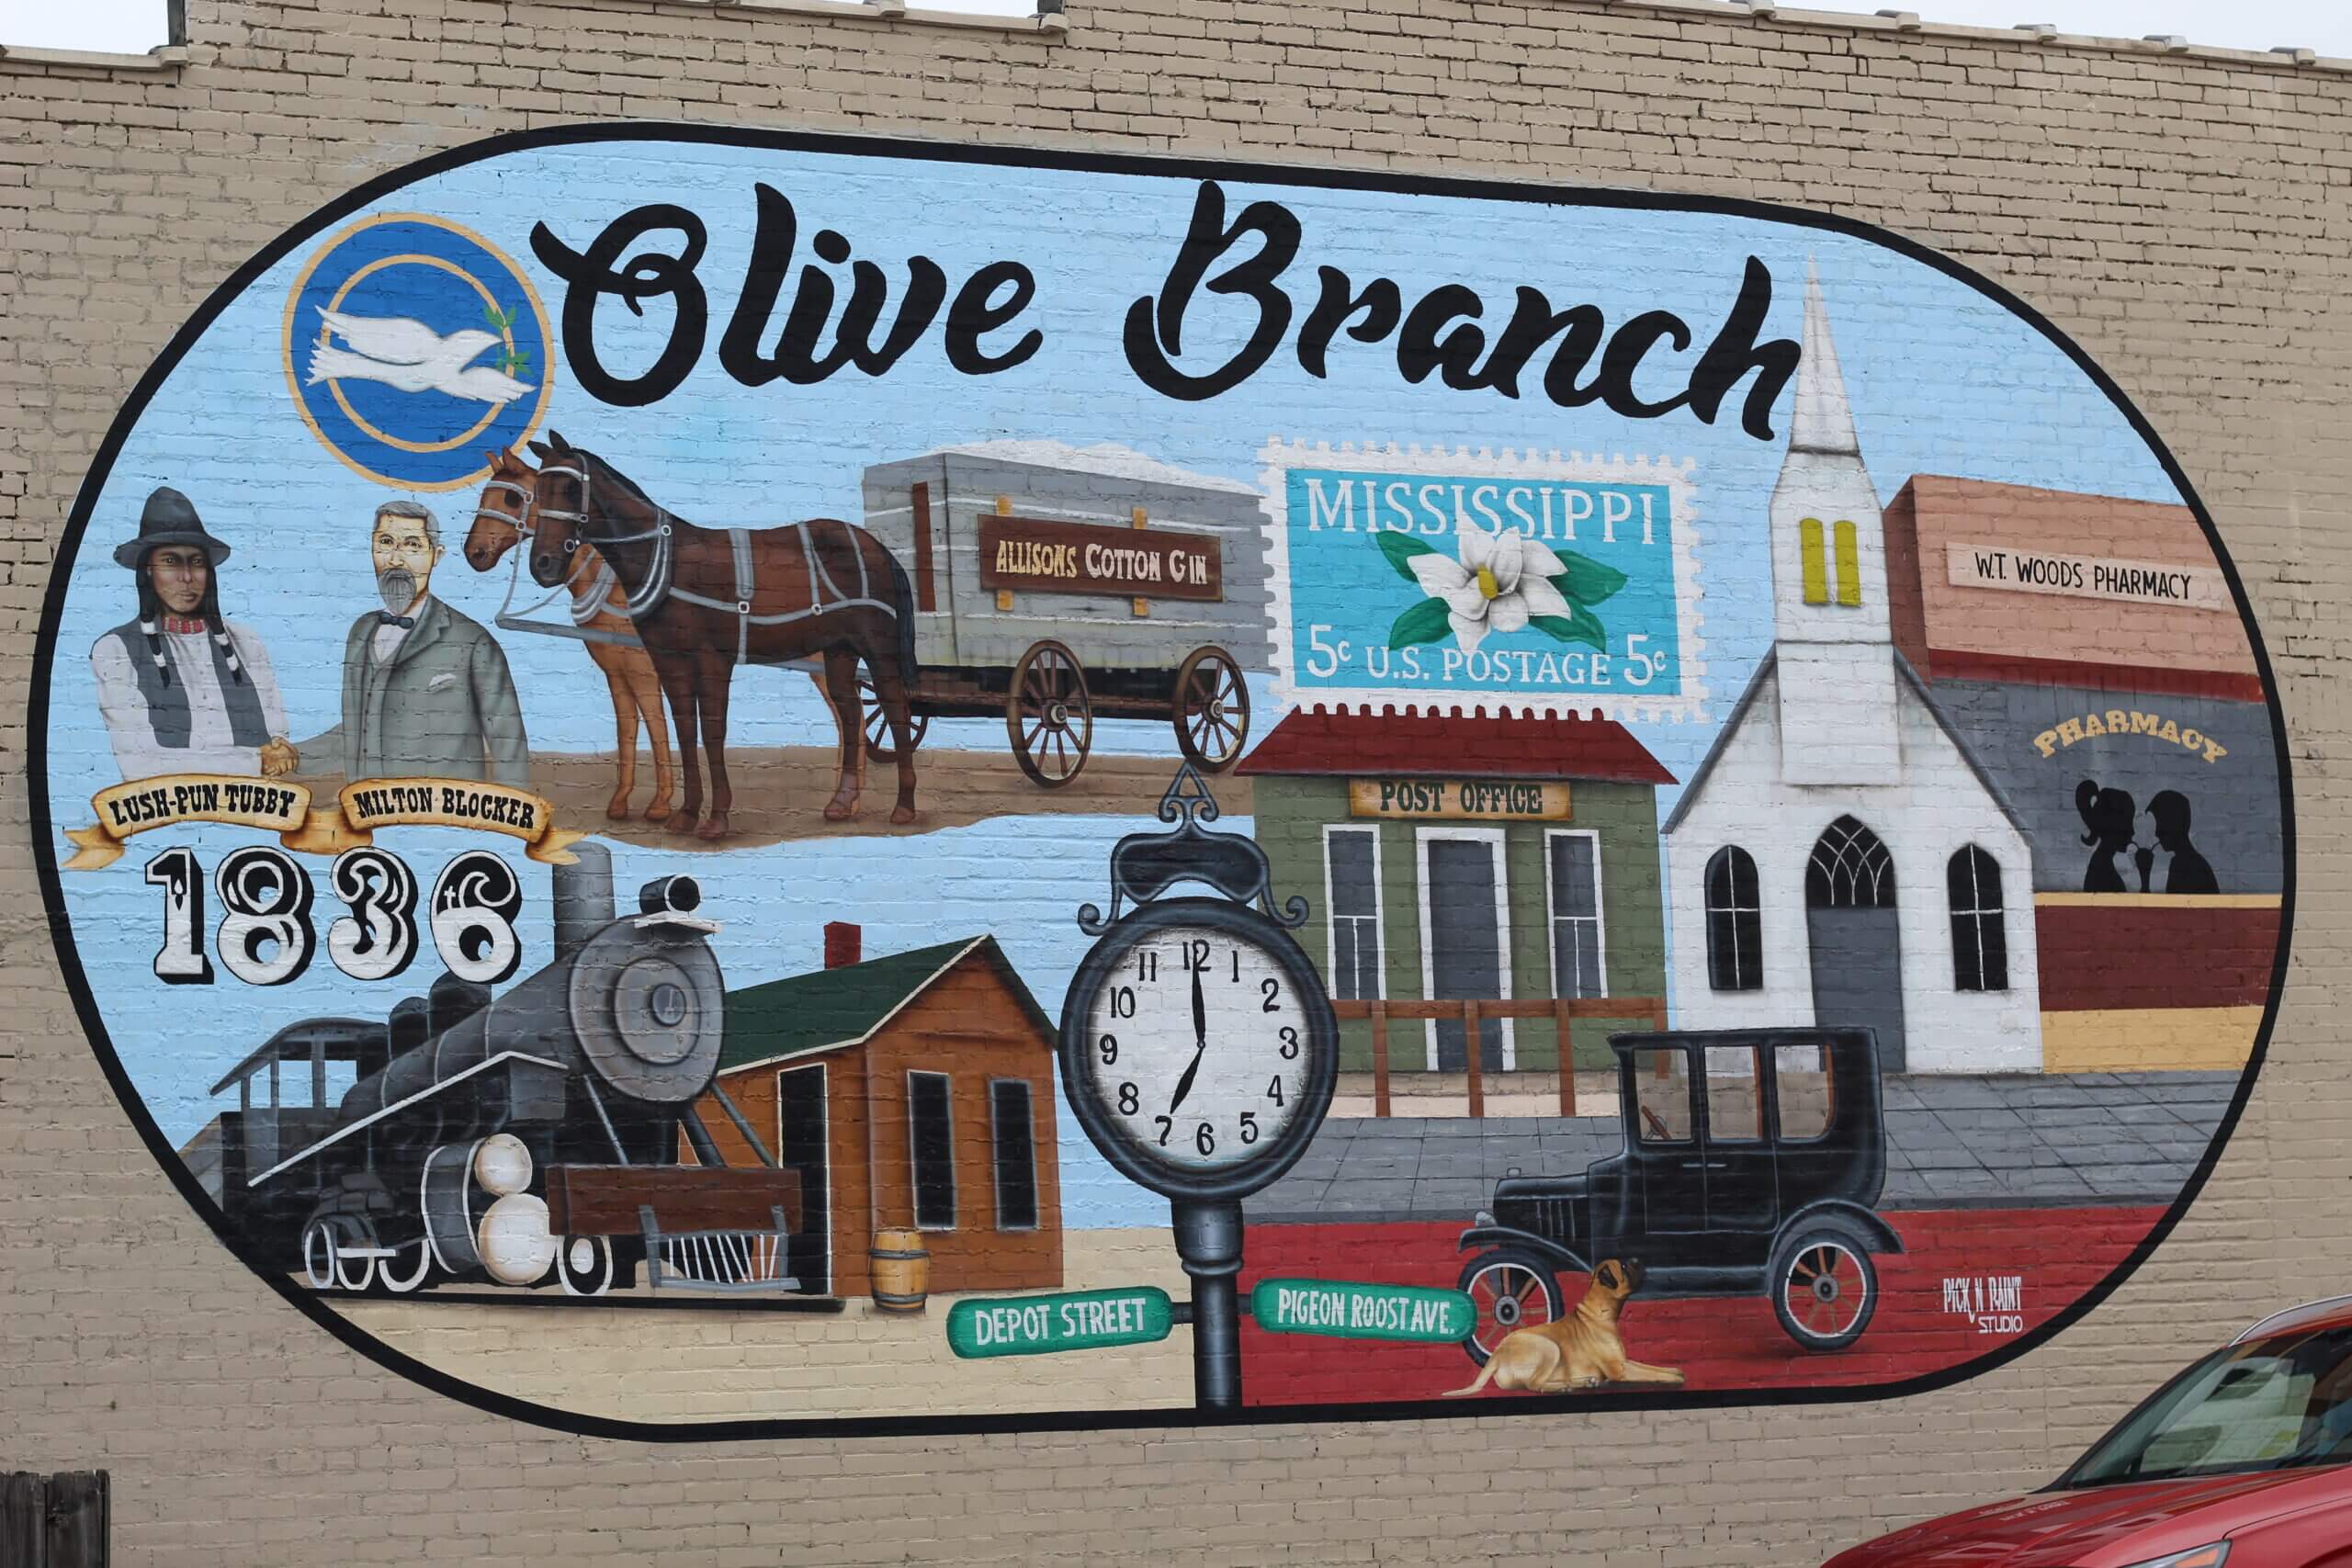 Olive Branch annexation petition approved 